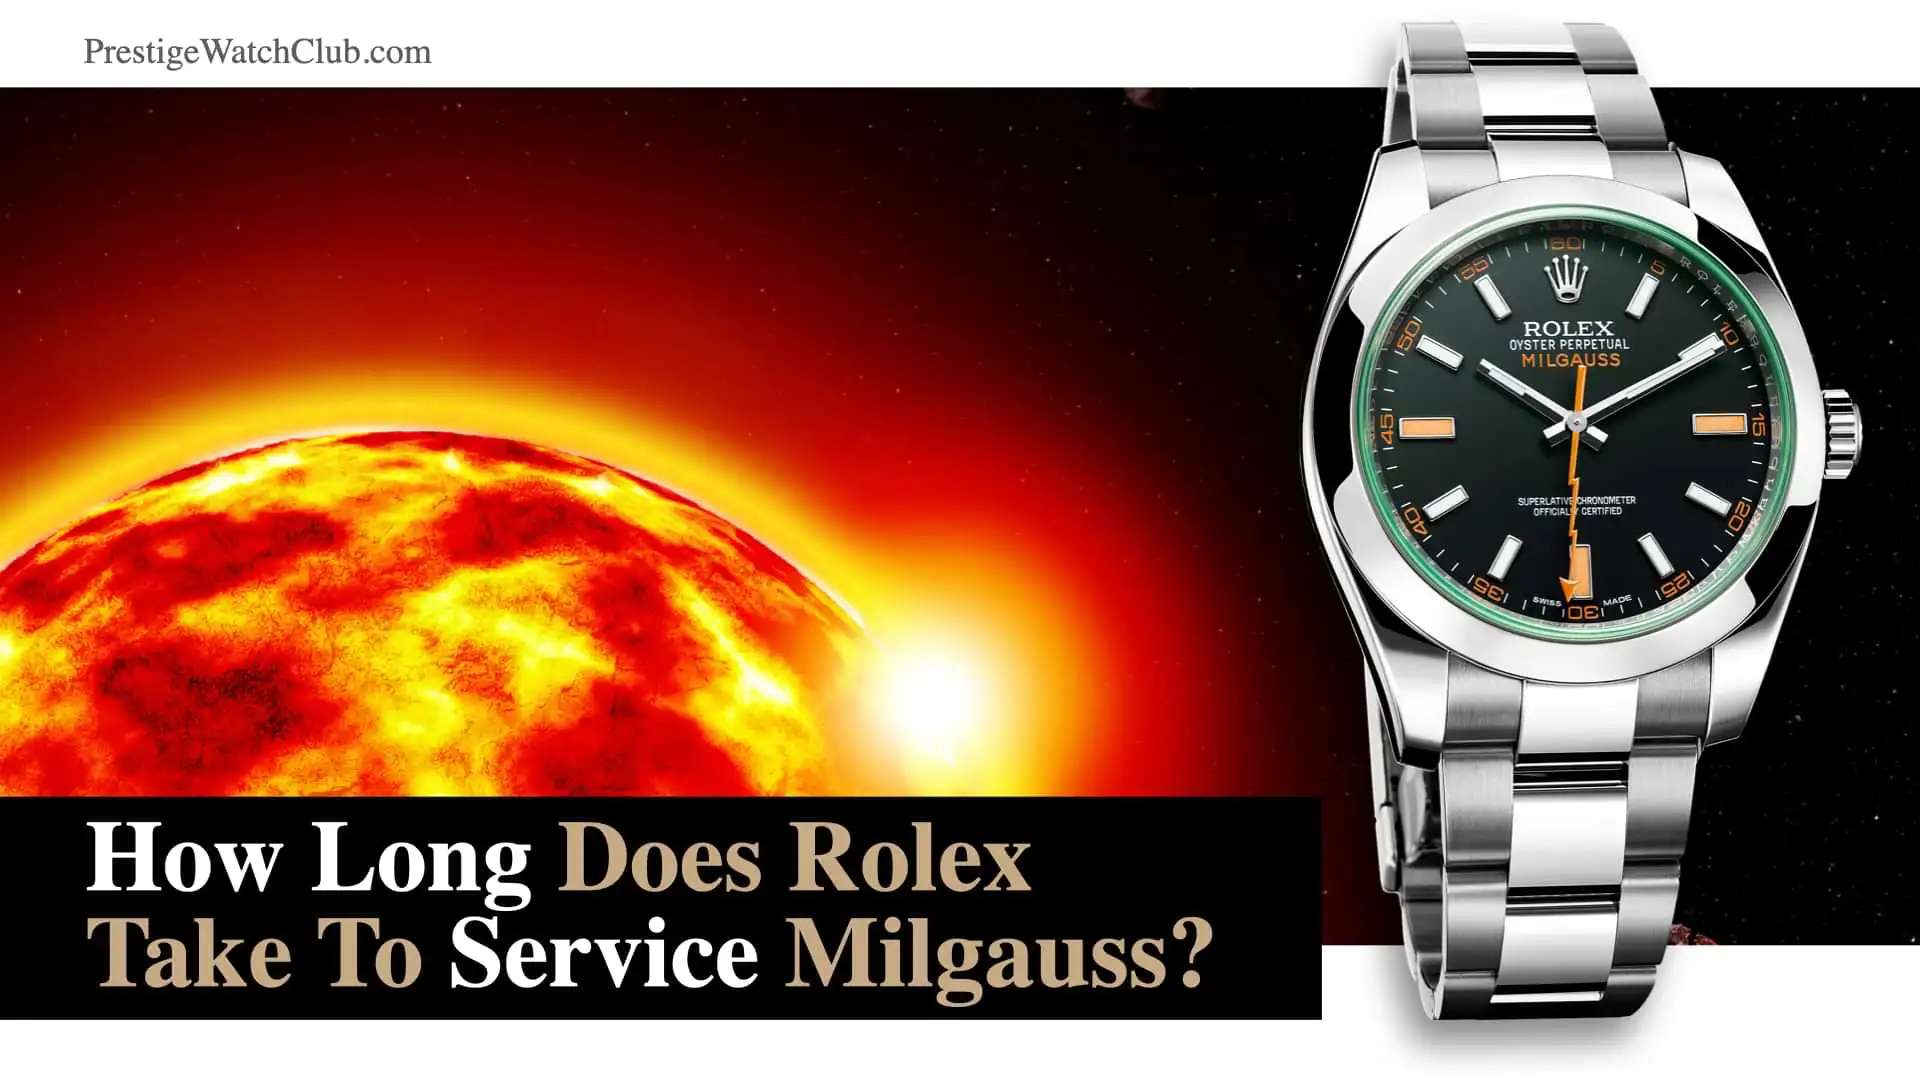 How Long Does Rolex Take To Service A Rolex Milgauss?